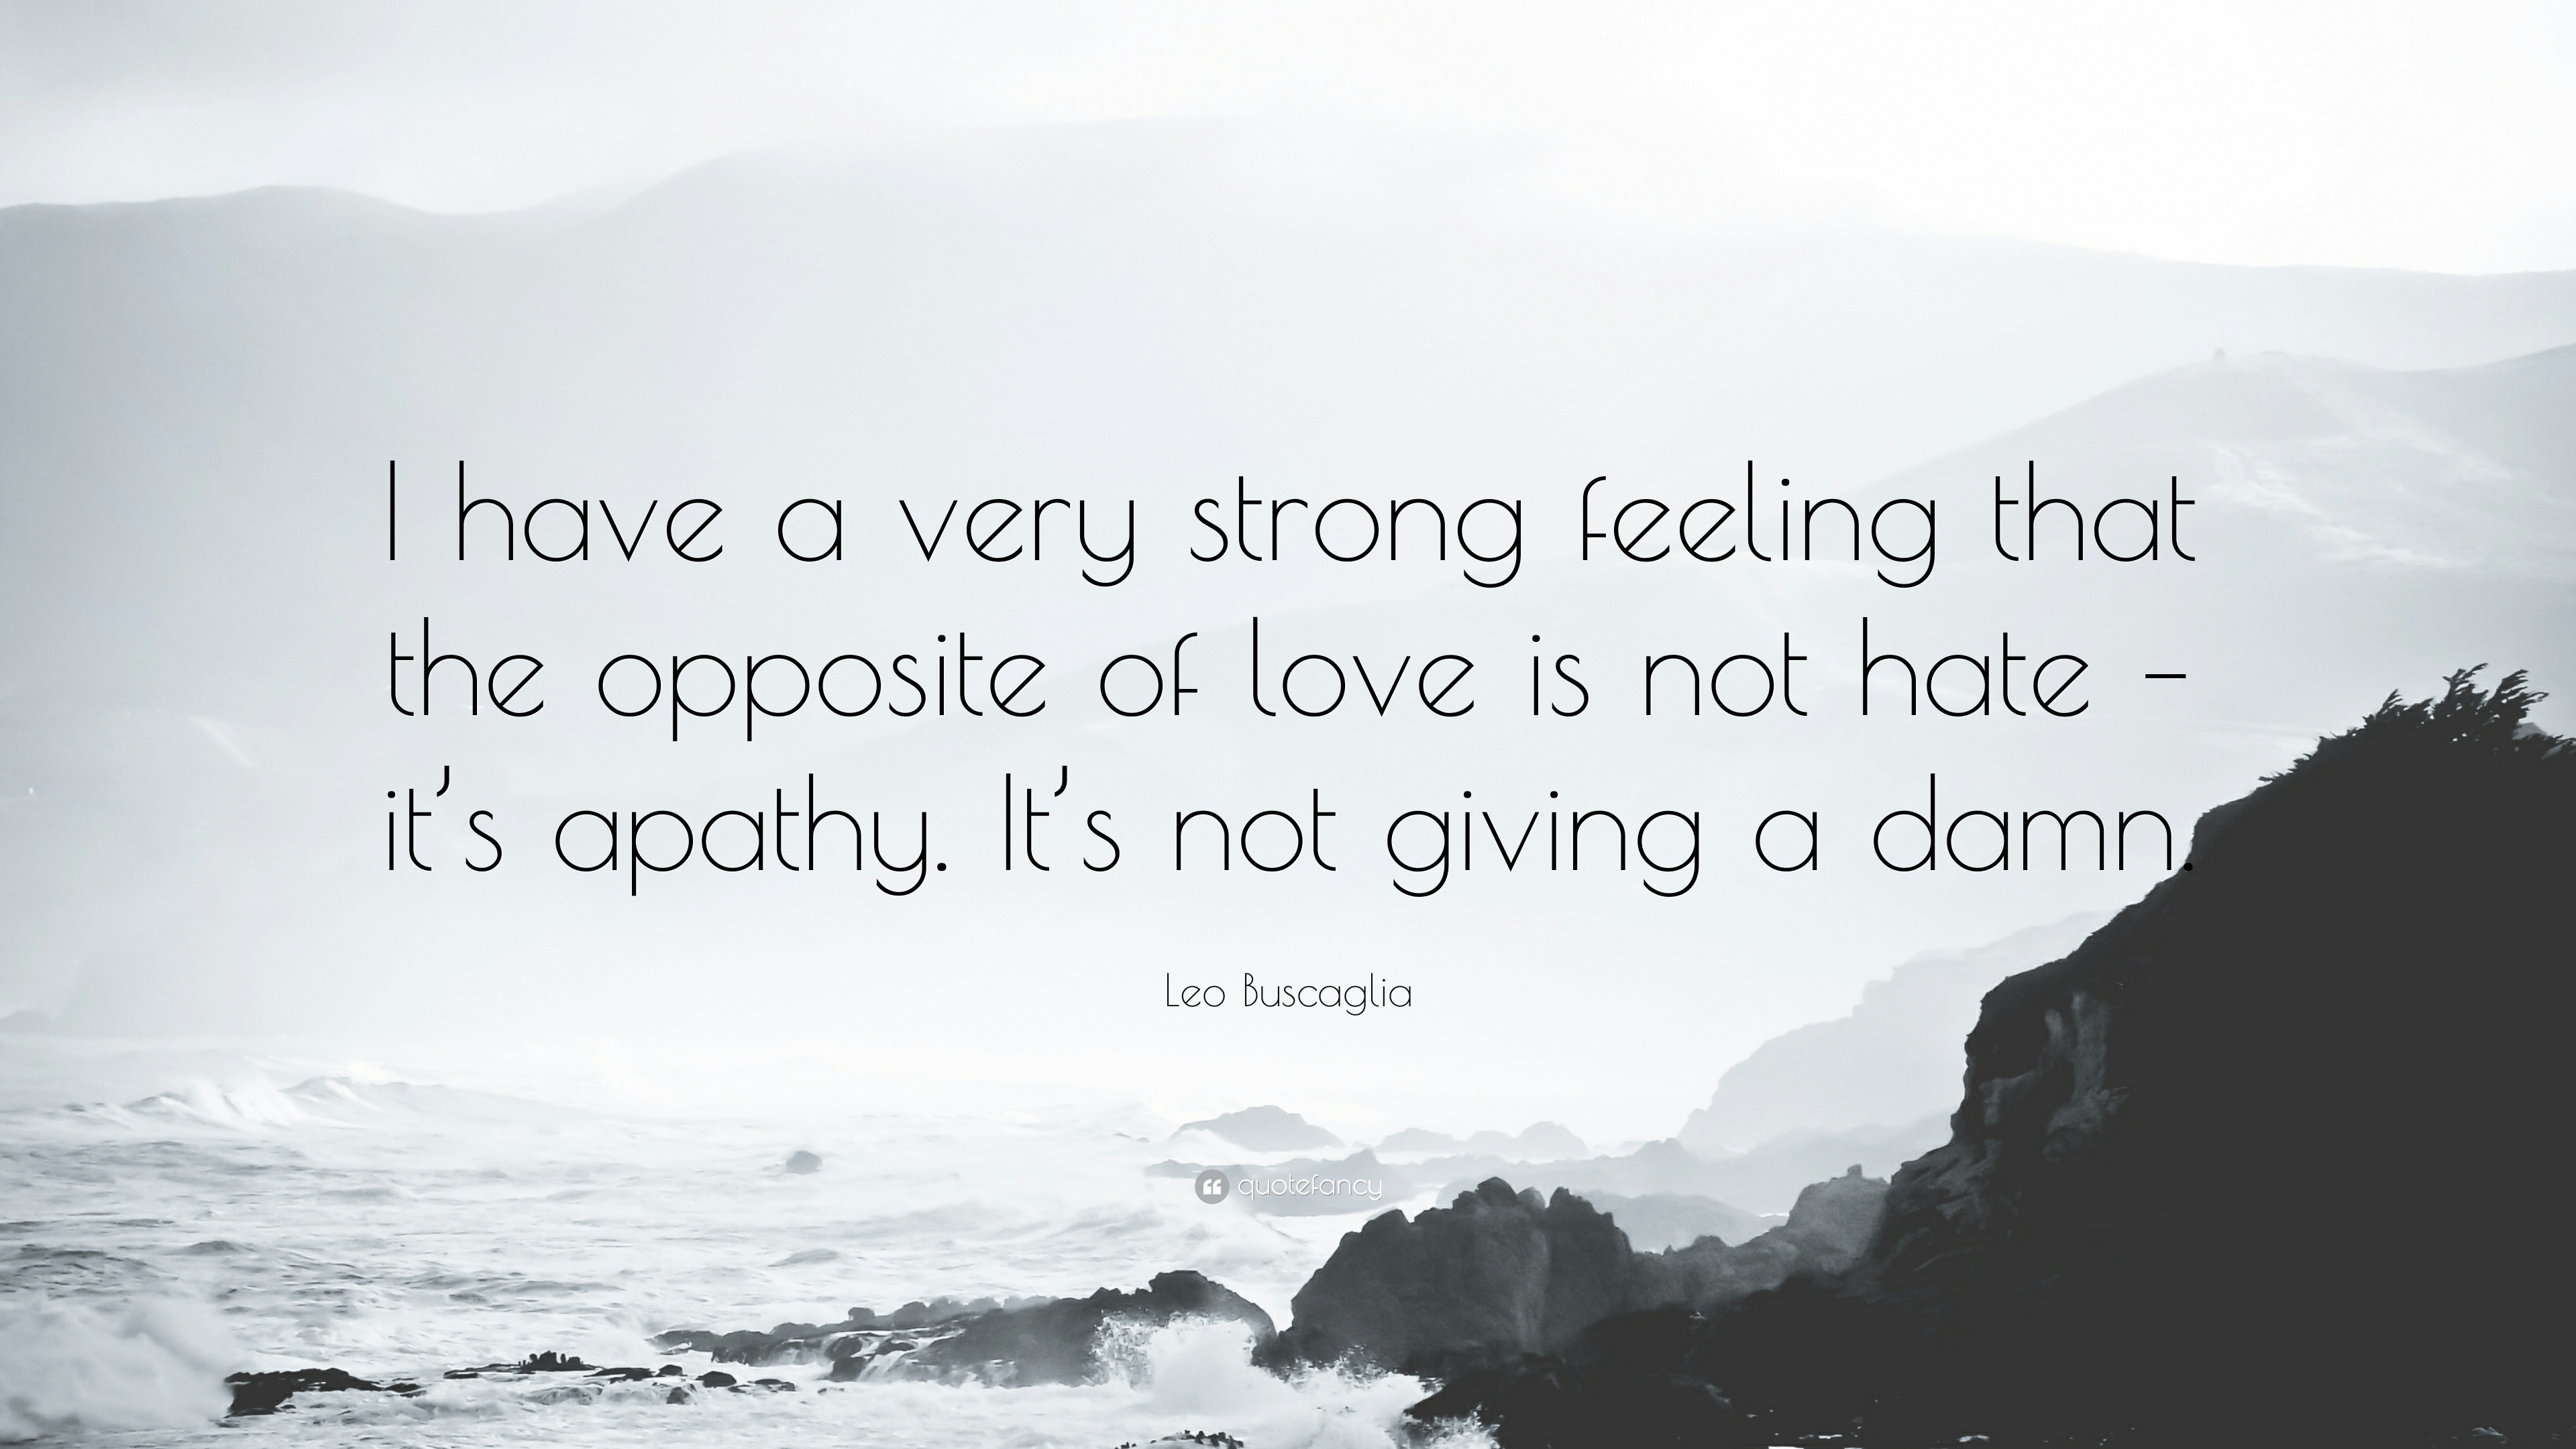 Leo Buscaglia Quote “I have a very strong feeling that the opposite of love